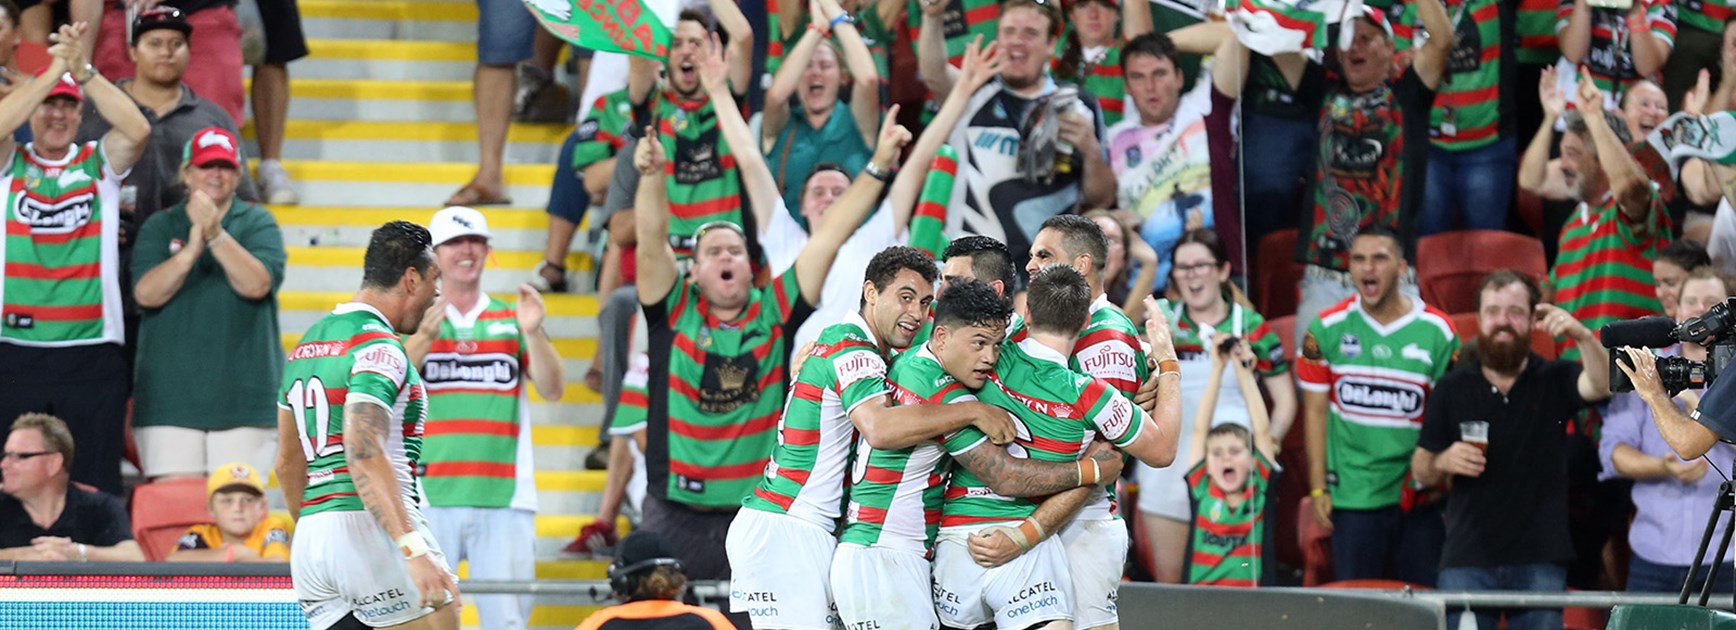 South Sydney players and fans celebrate during their Round 1 clash with the Broncos.